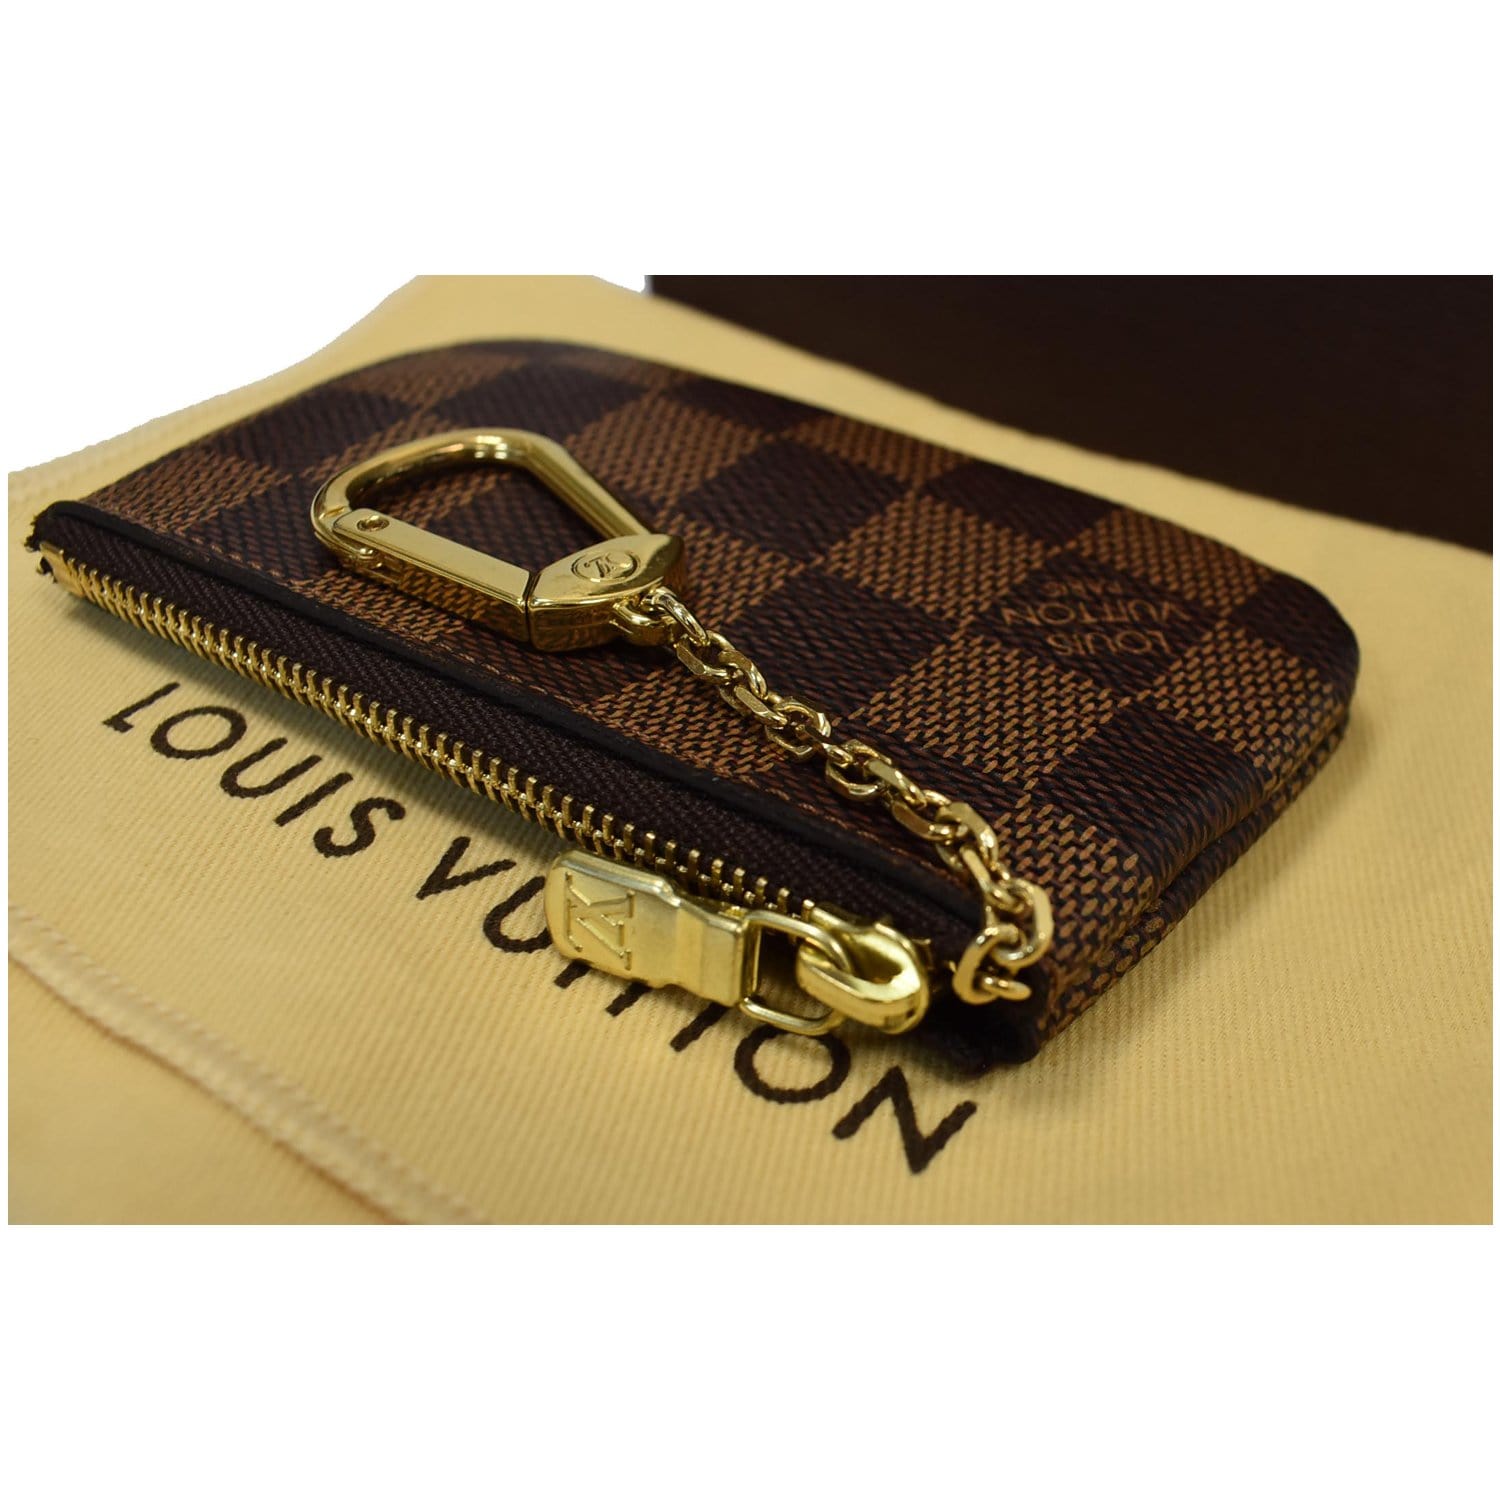 lv coin purse with chain